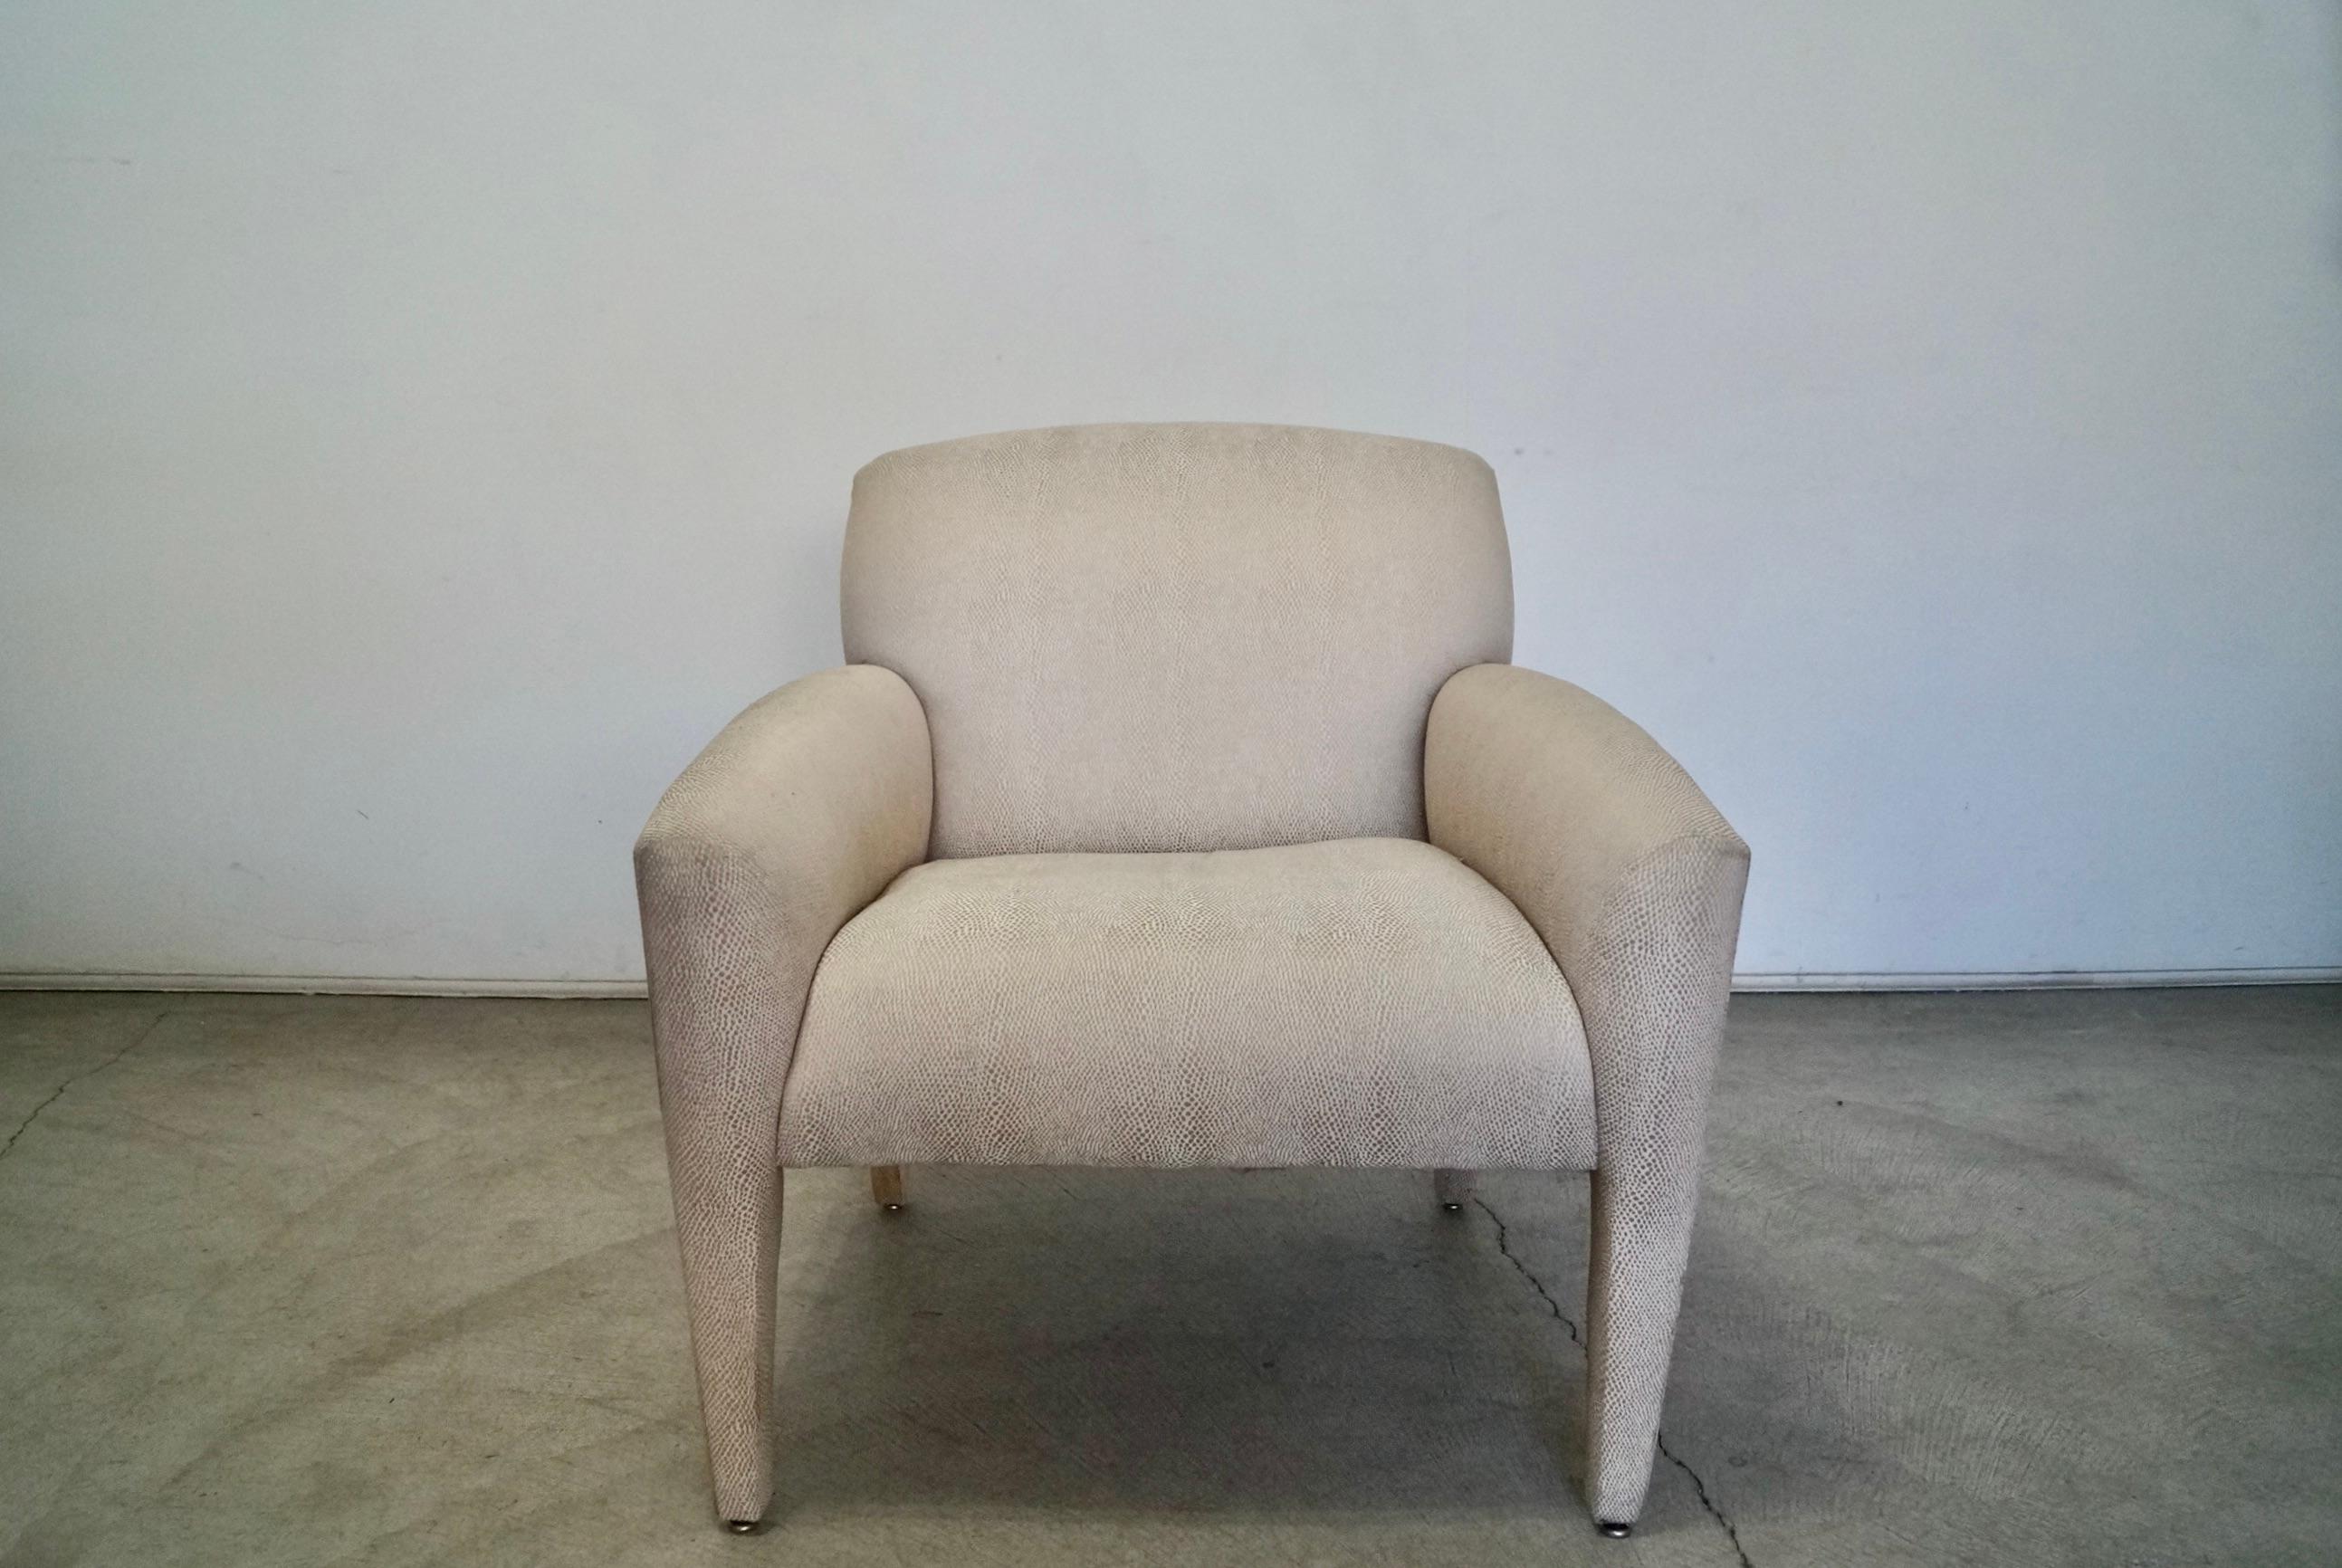 Vintage post-modern 1980s chair for sale. Designed by Vladimir Kagan for Preview, and needs reupholstery. Great Kagan design and style with clean lines. Very comfortable and very well made. Has webbing on the seat for support. Structurally sound and